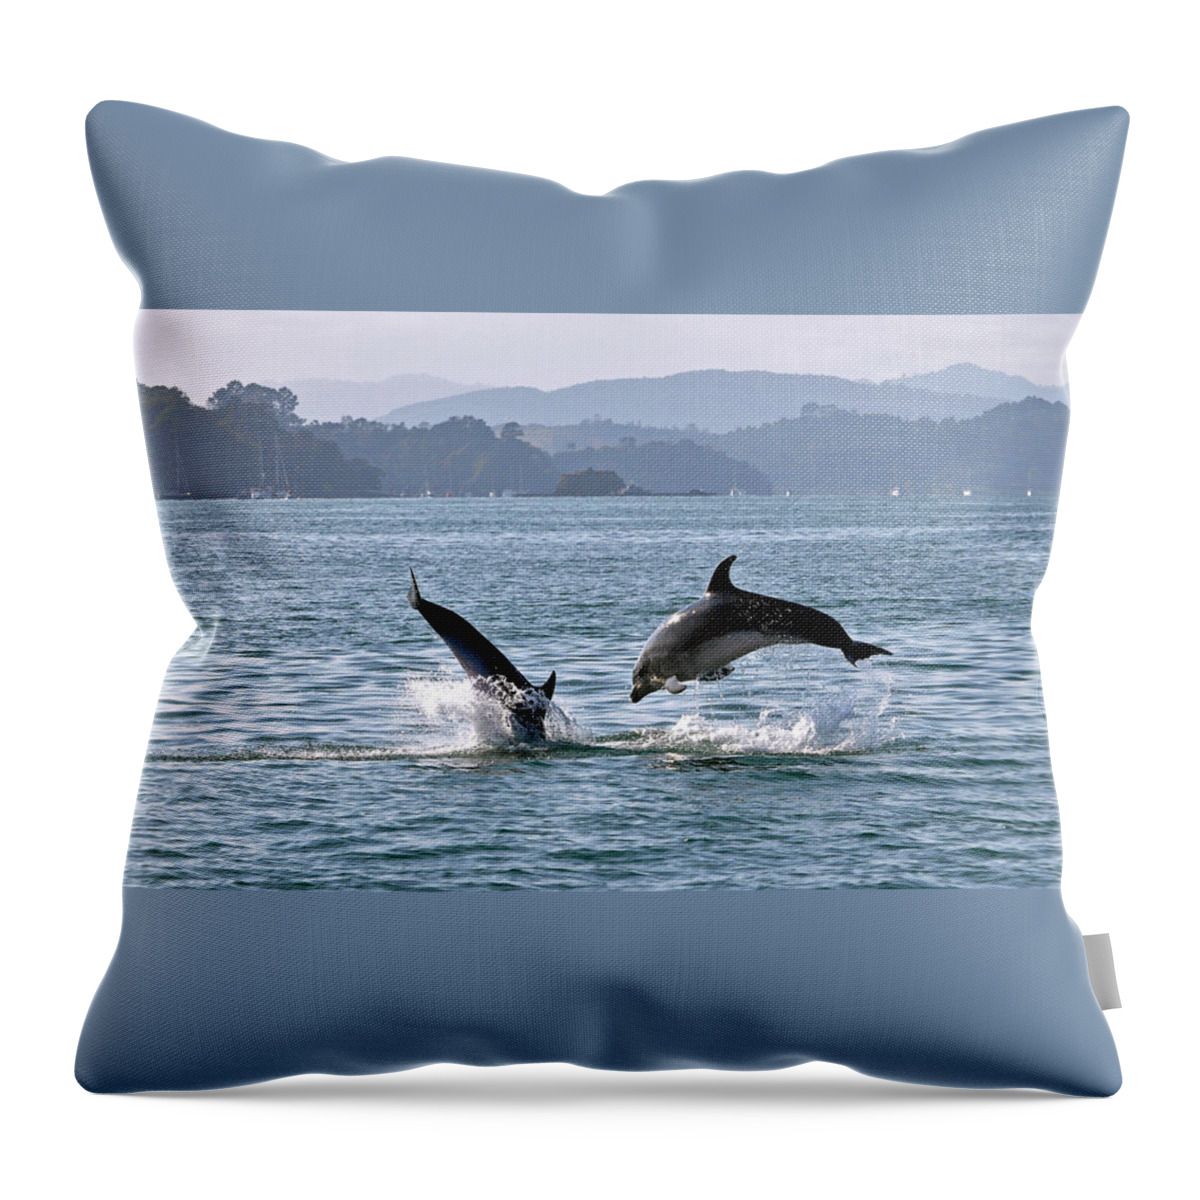 Scenics Throw Pillow featuring the photograph Playing Around In The Bay Of Islands by Steve Clancy Photography